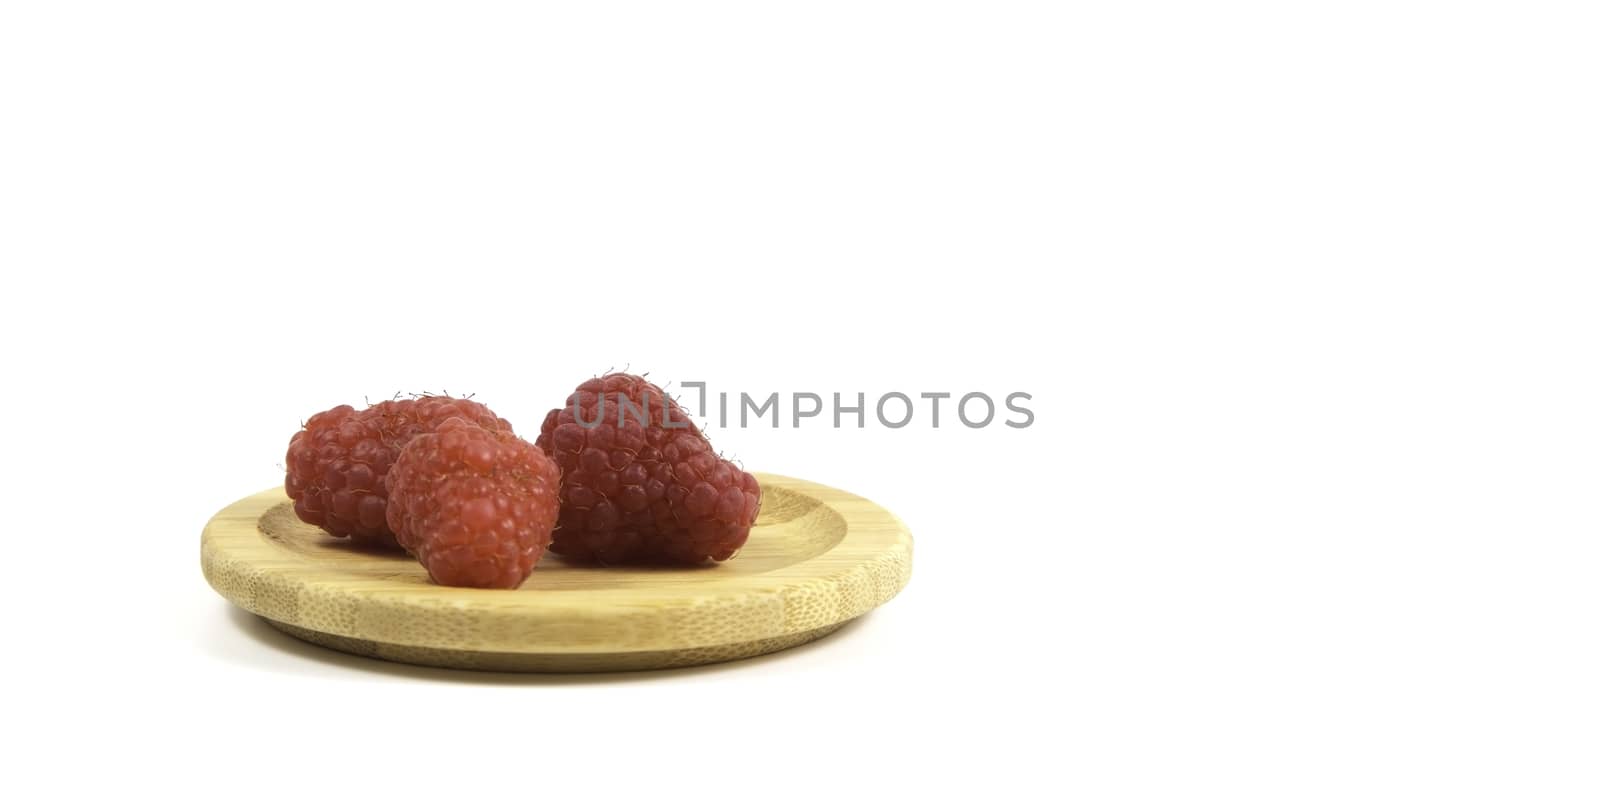 Ripe tasty bright Fresh raspberry in a wicker basket on a cutting board on a white background. High quality photo